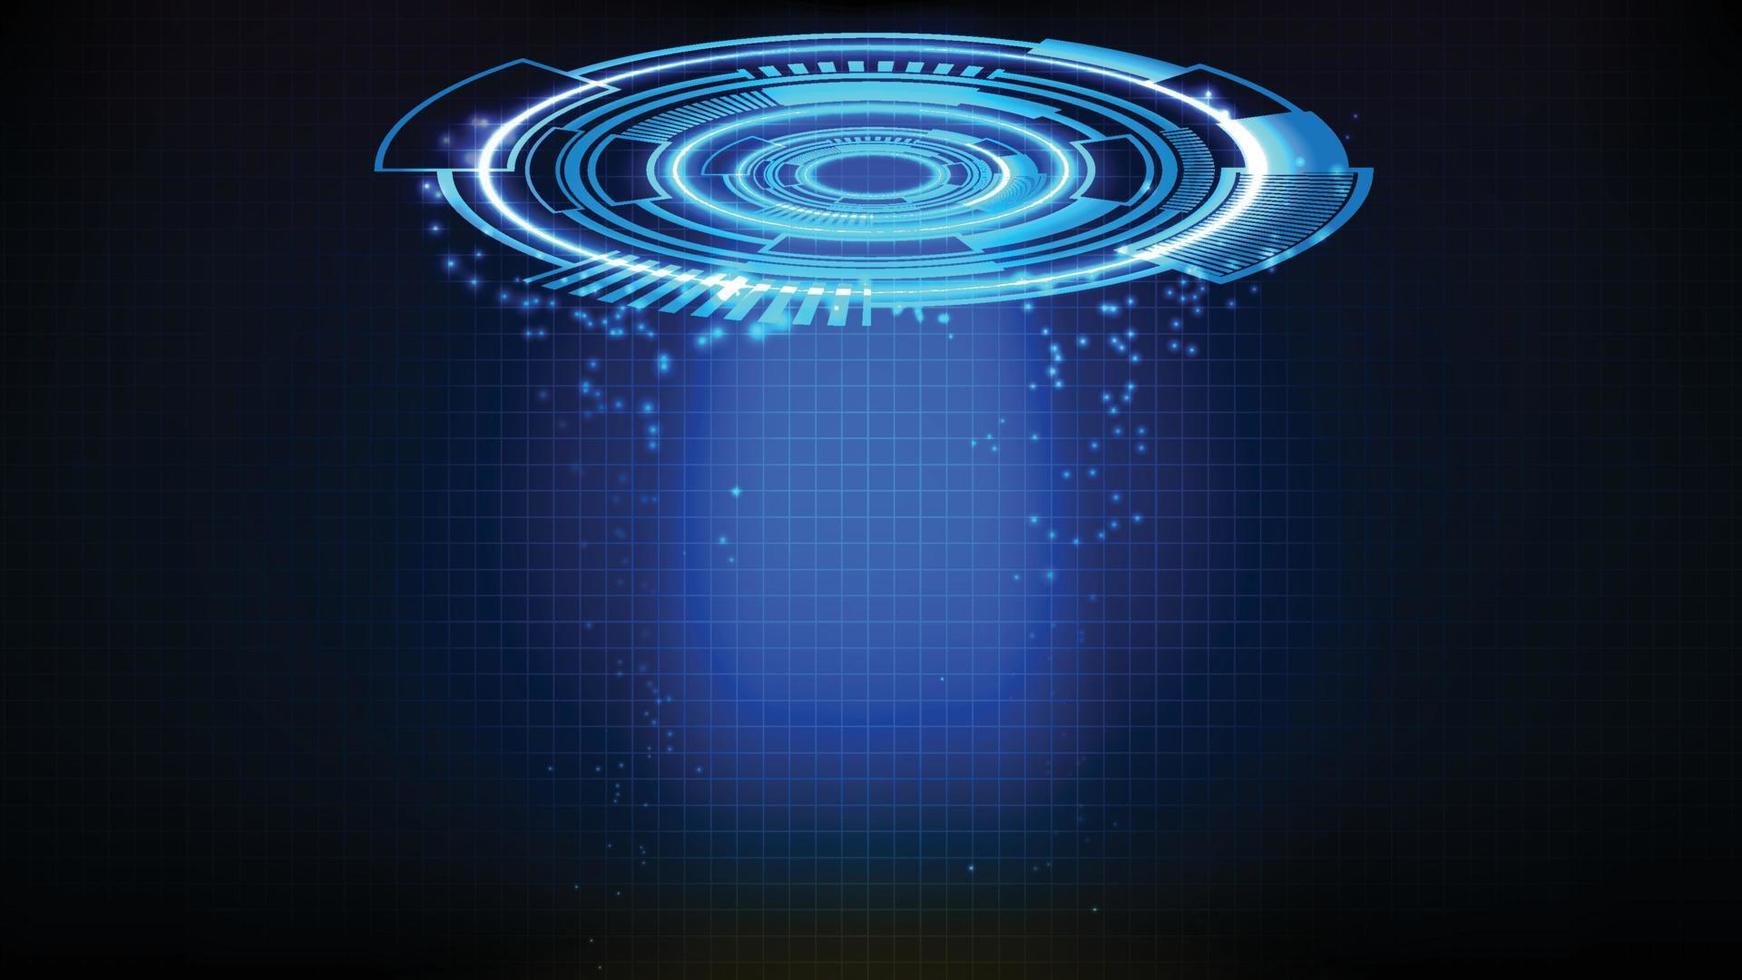 abstract background of blue futuristic technology hud display interface vector